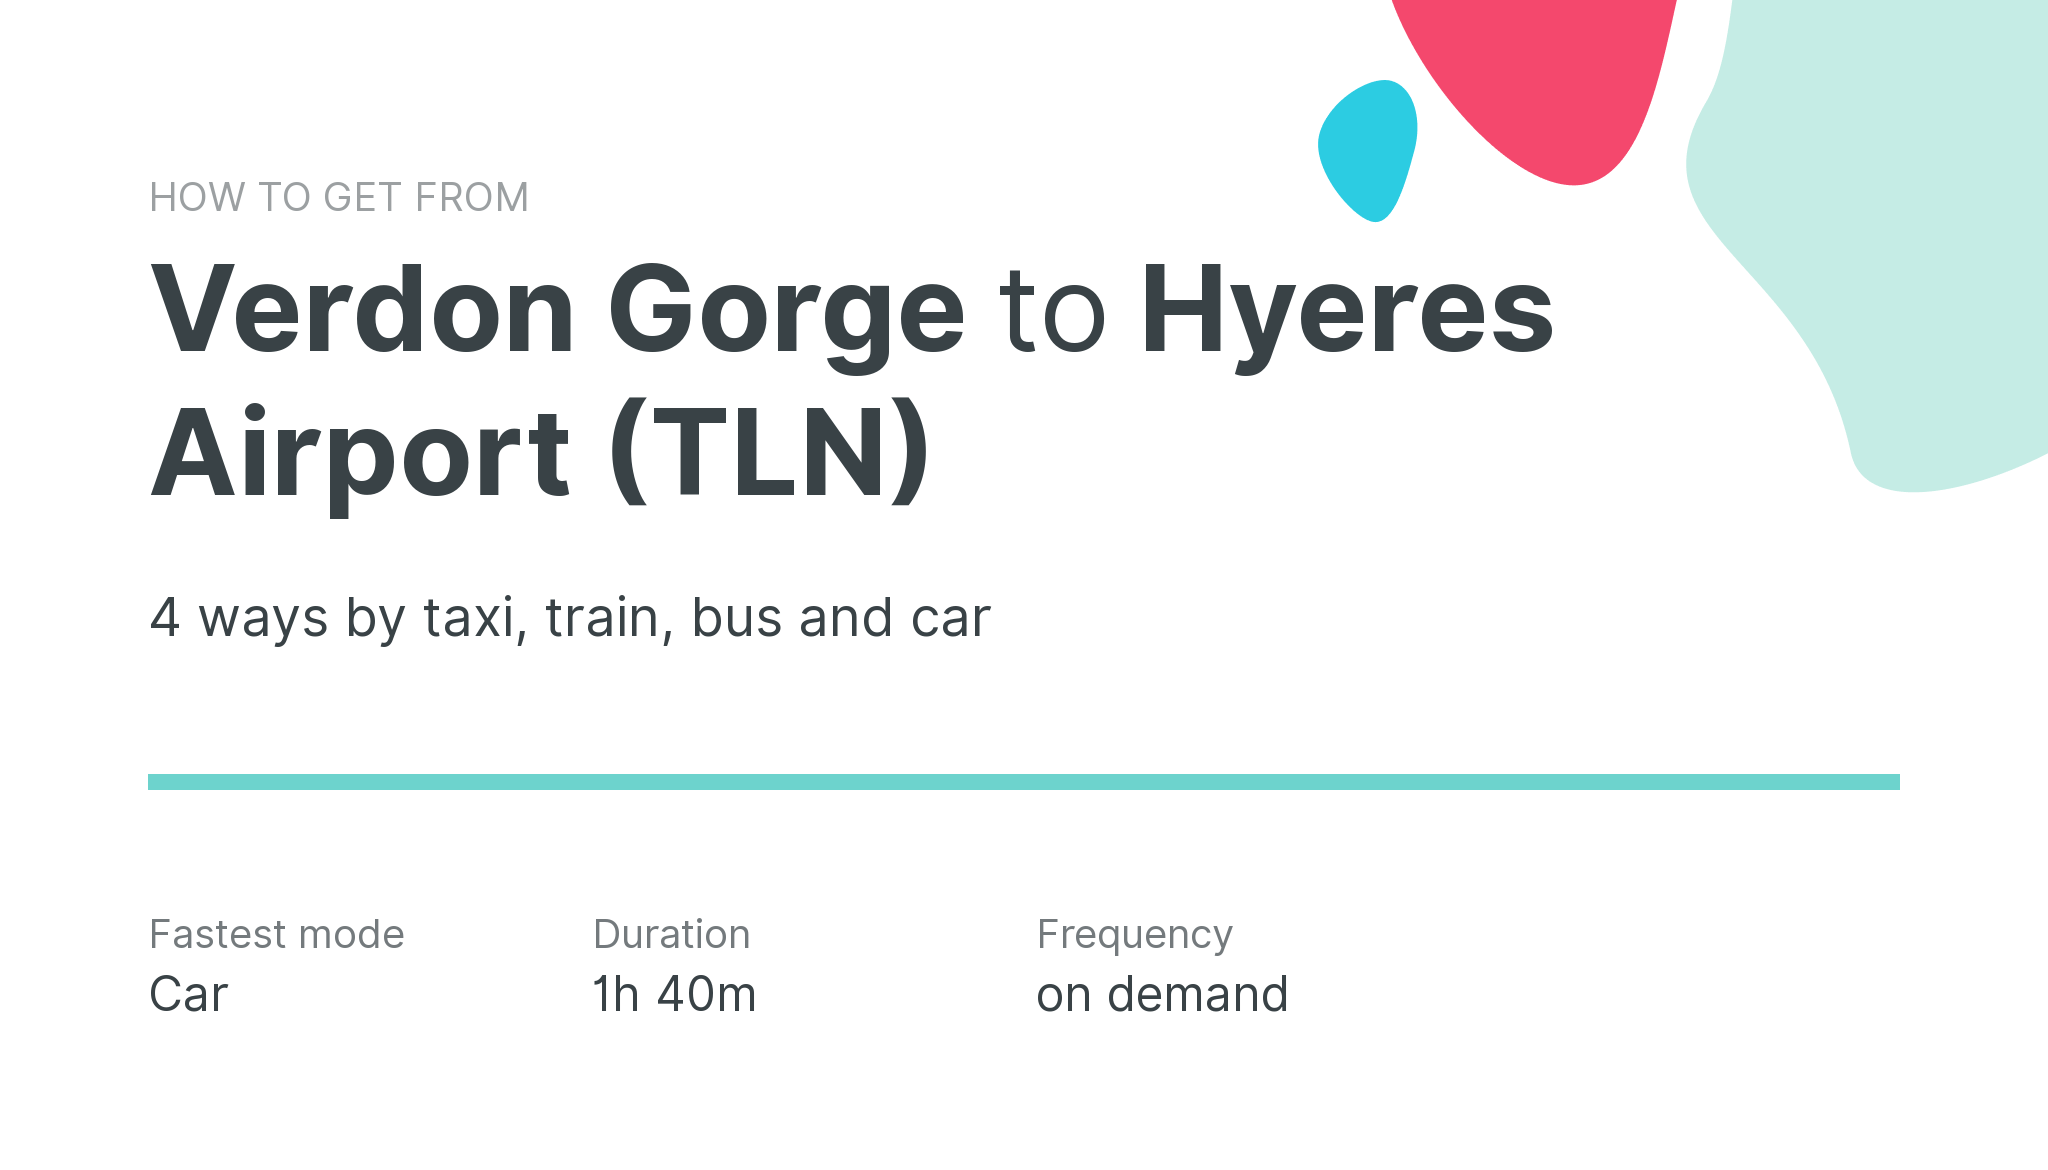 How do I get from Verdon Gorge to Hyeres Airport (TLN)